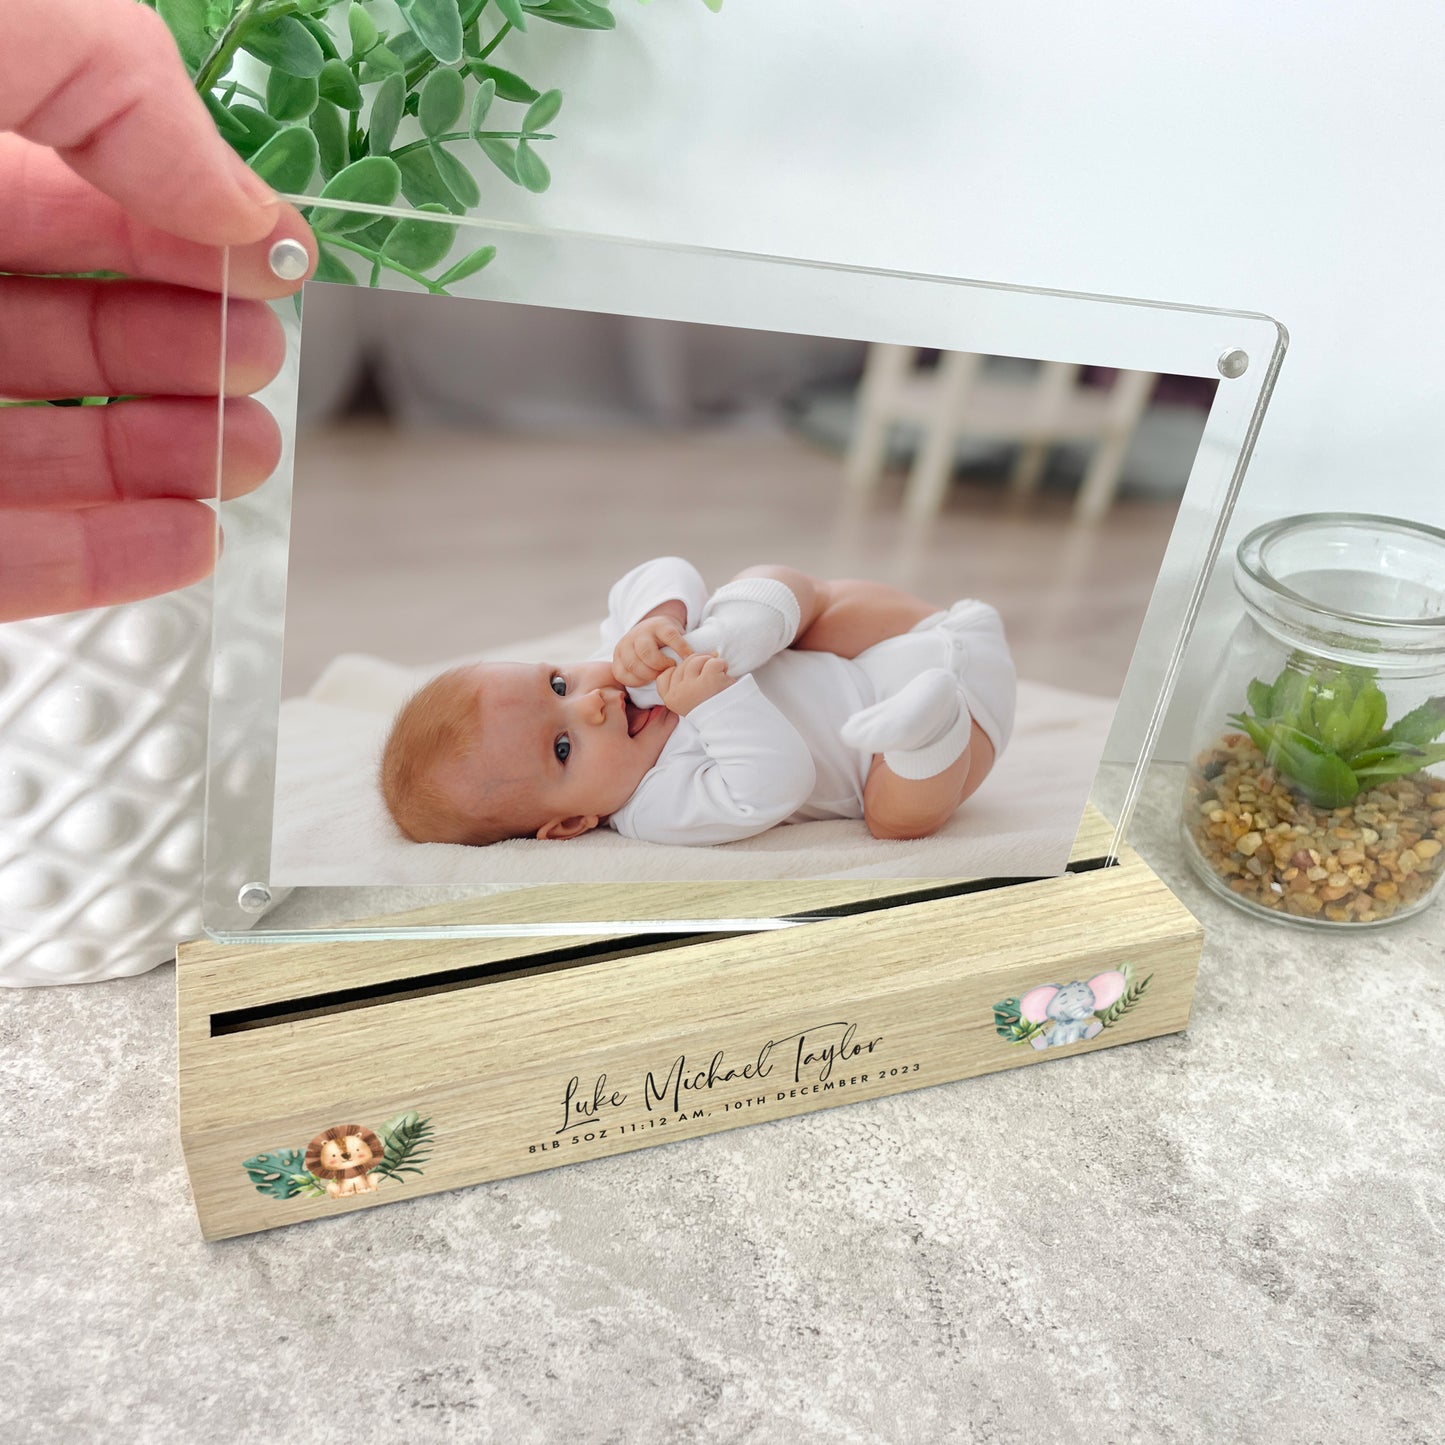 Personalised Jungle Animals New Baby Wooden Base 6x4" Photo Frame